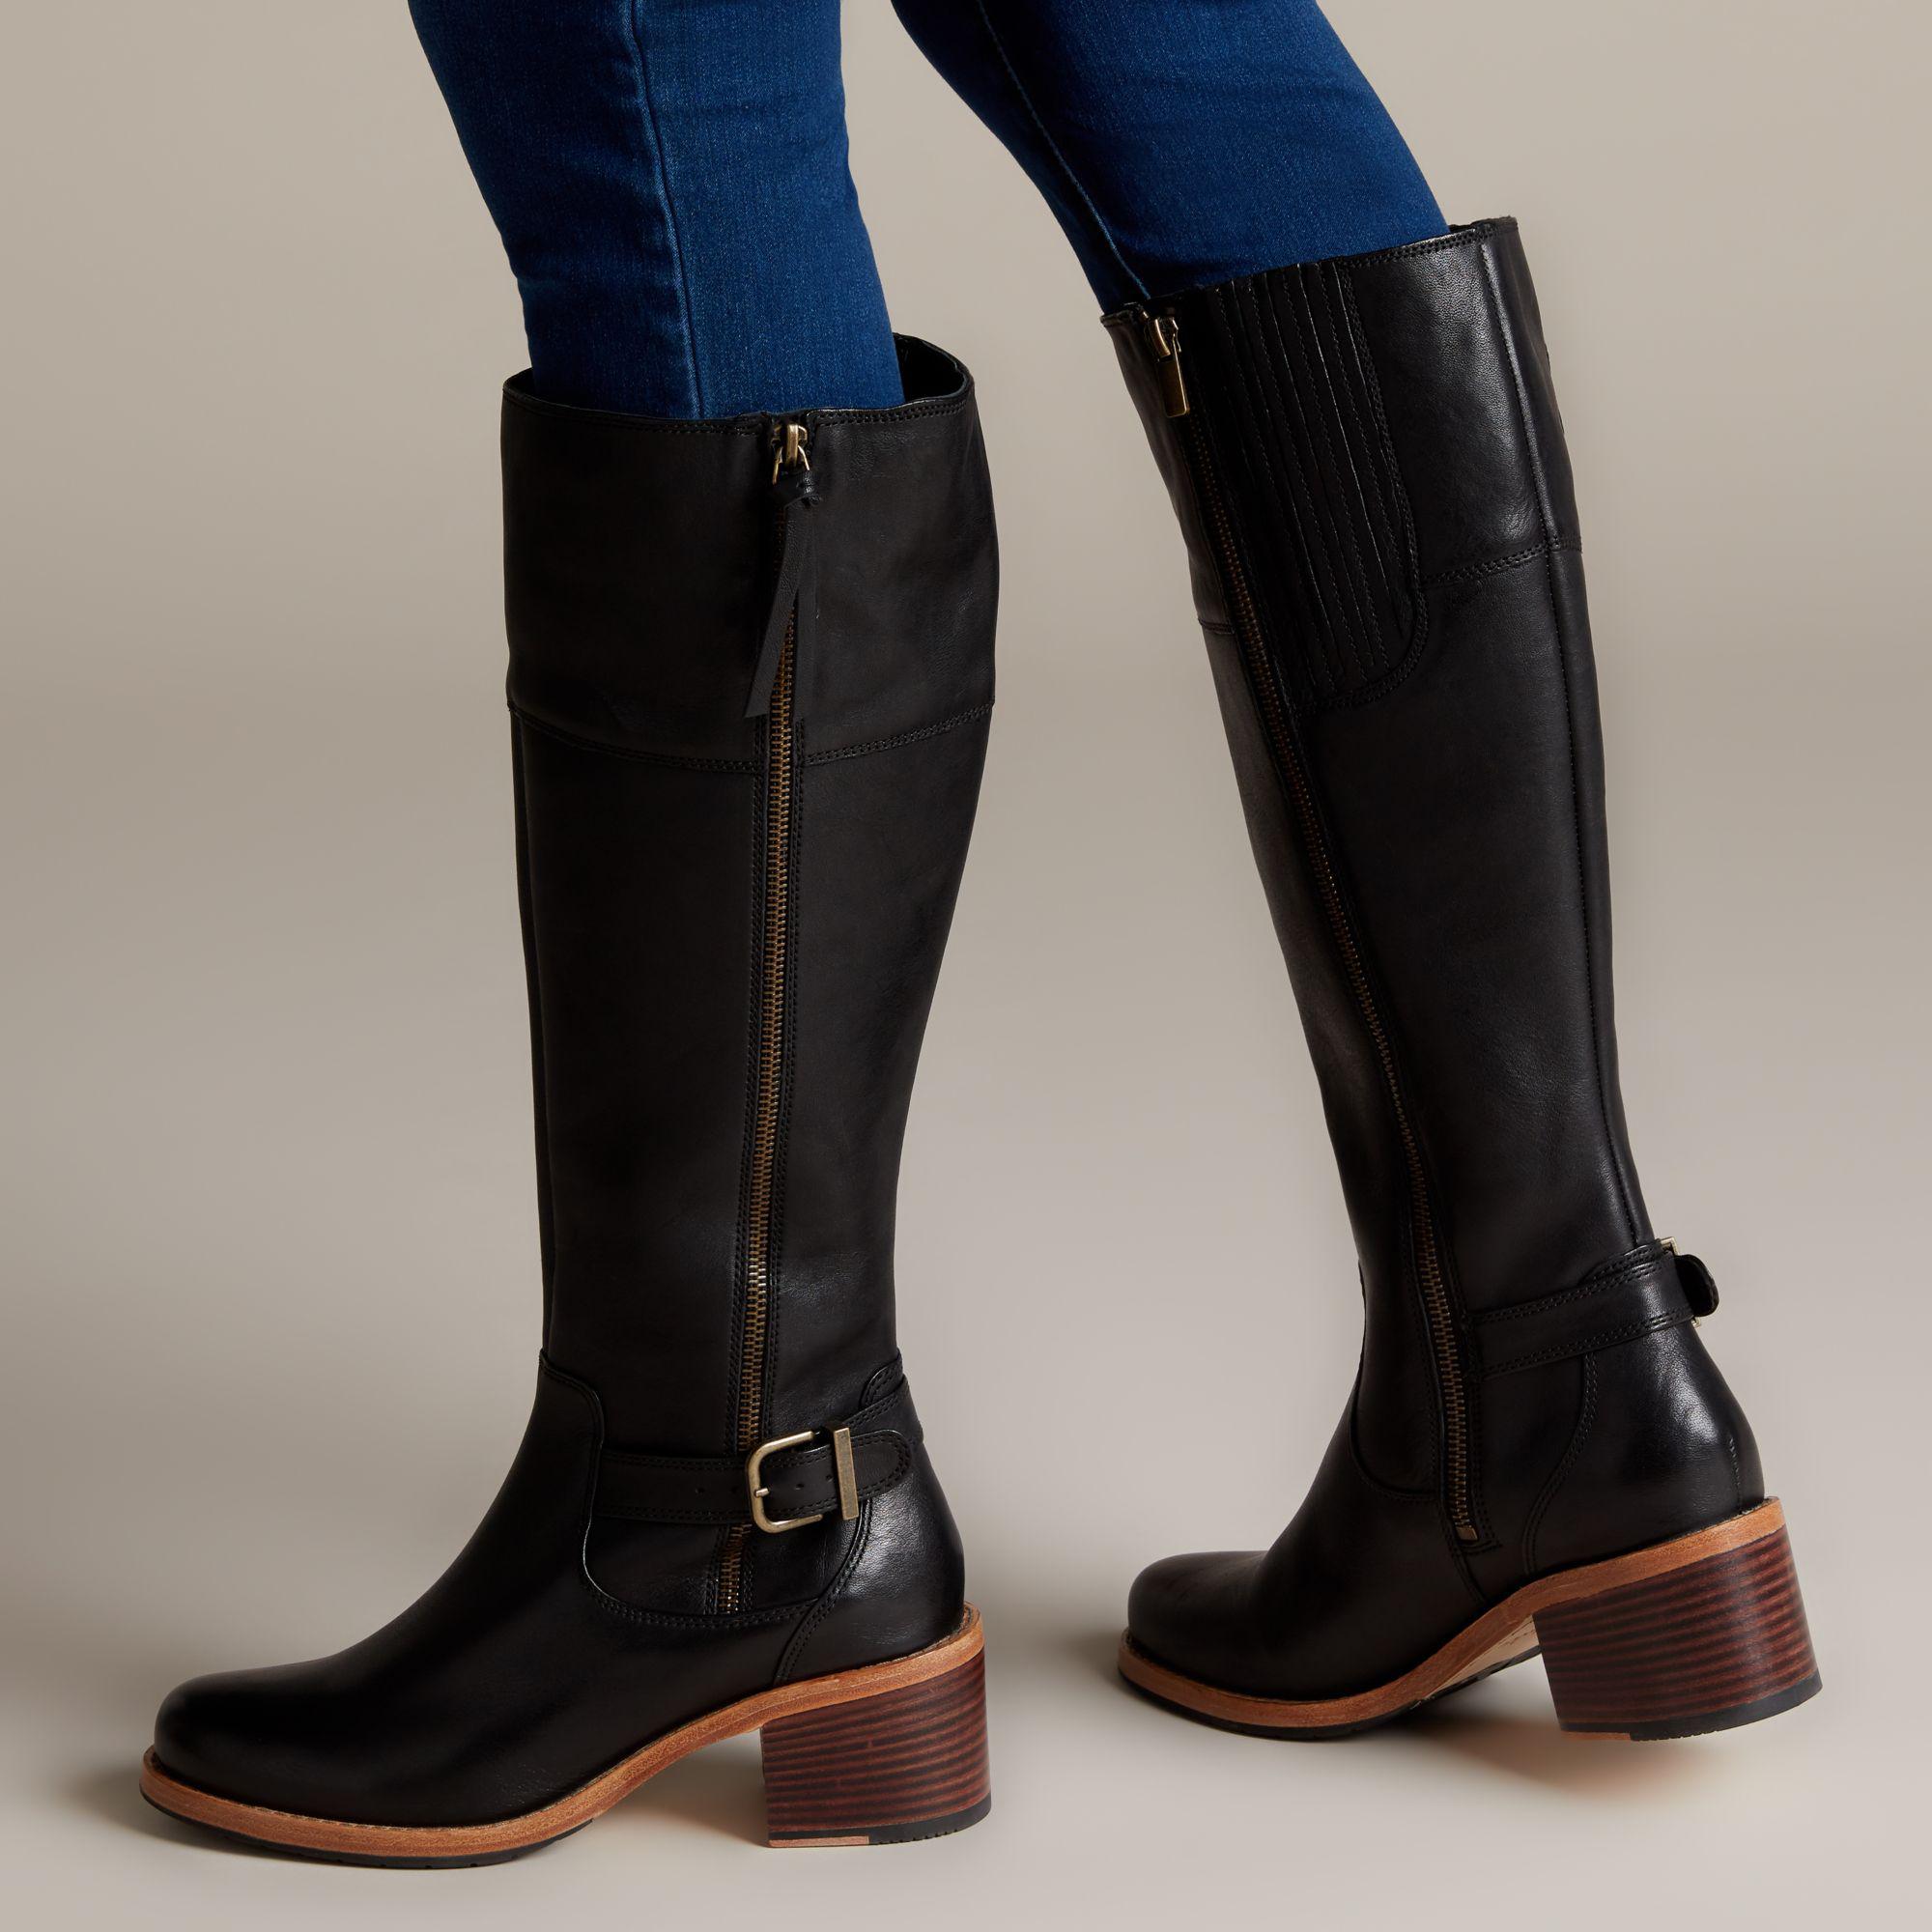 Clarks Clarkdale Sona Leather Knee High 